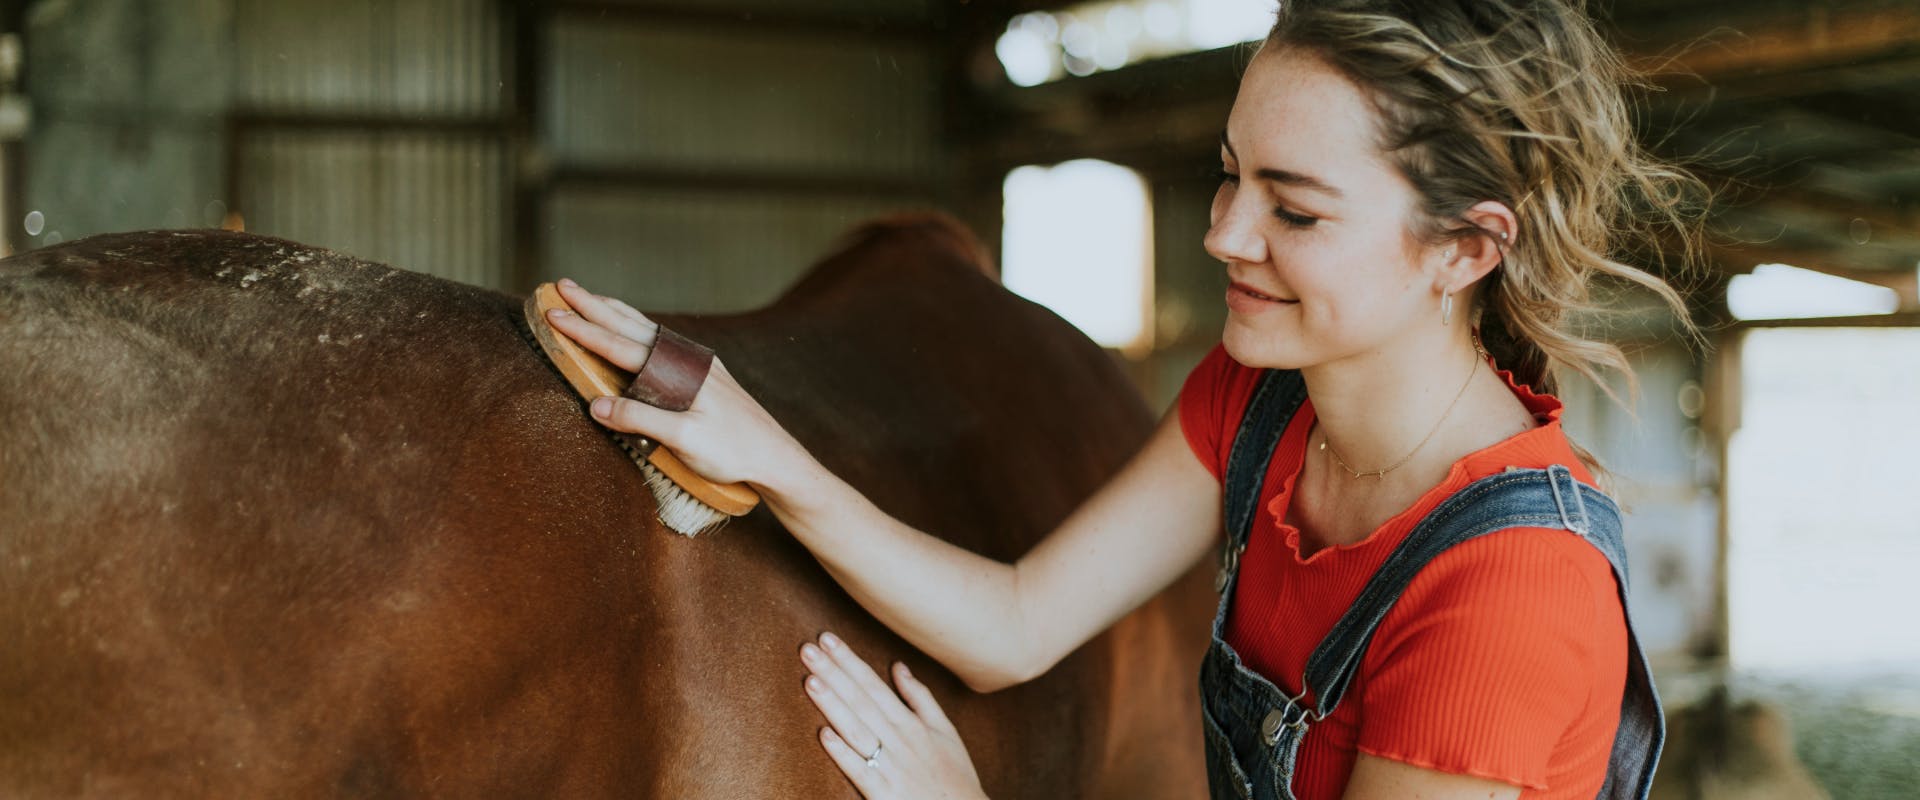 a smiling woman in a red shirt and dungarees brushing down a brown horse